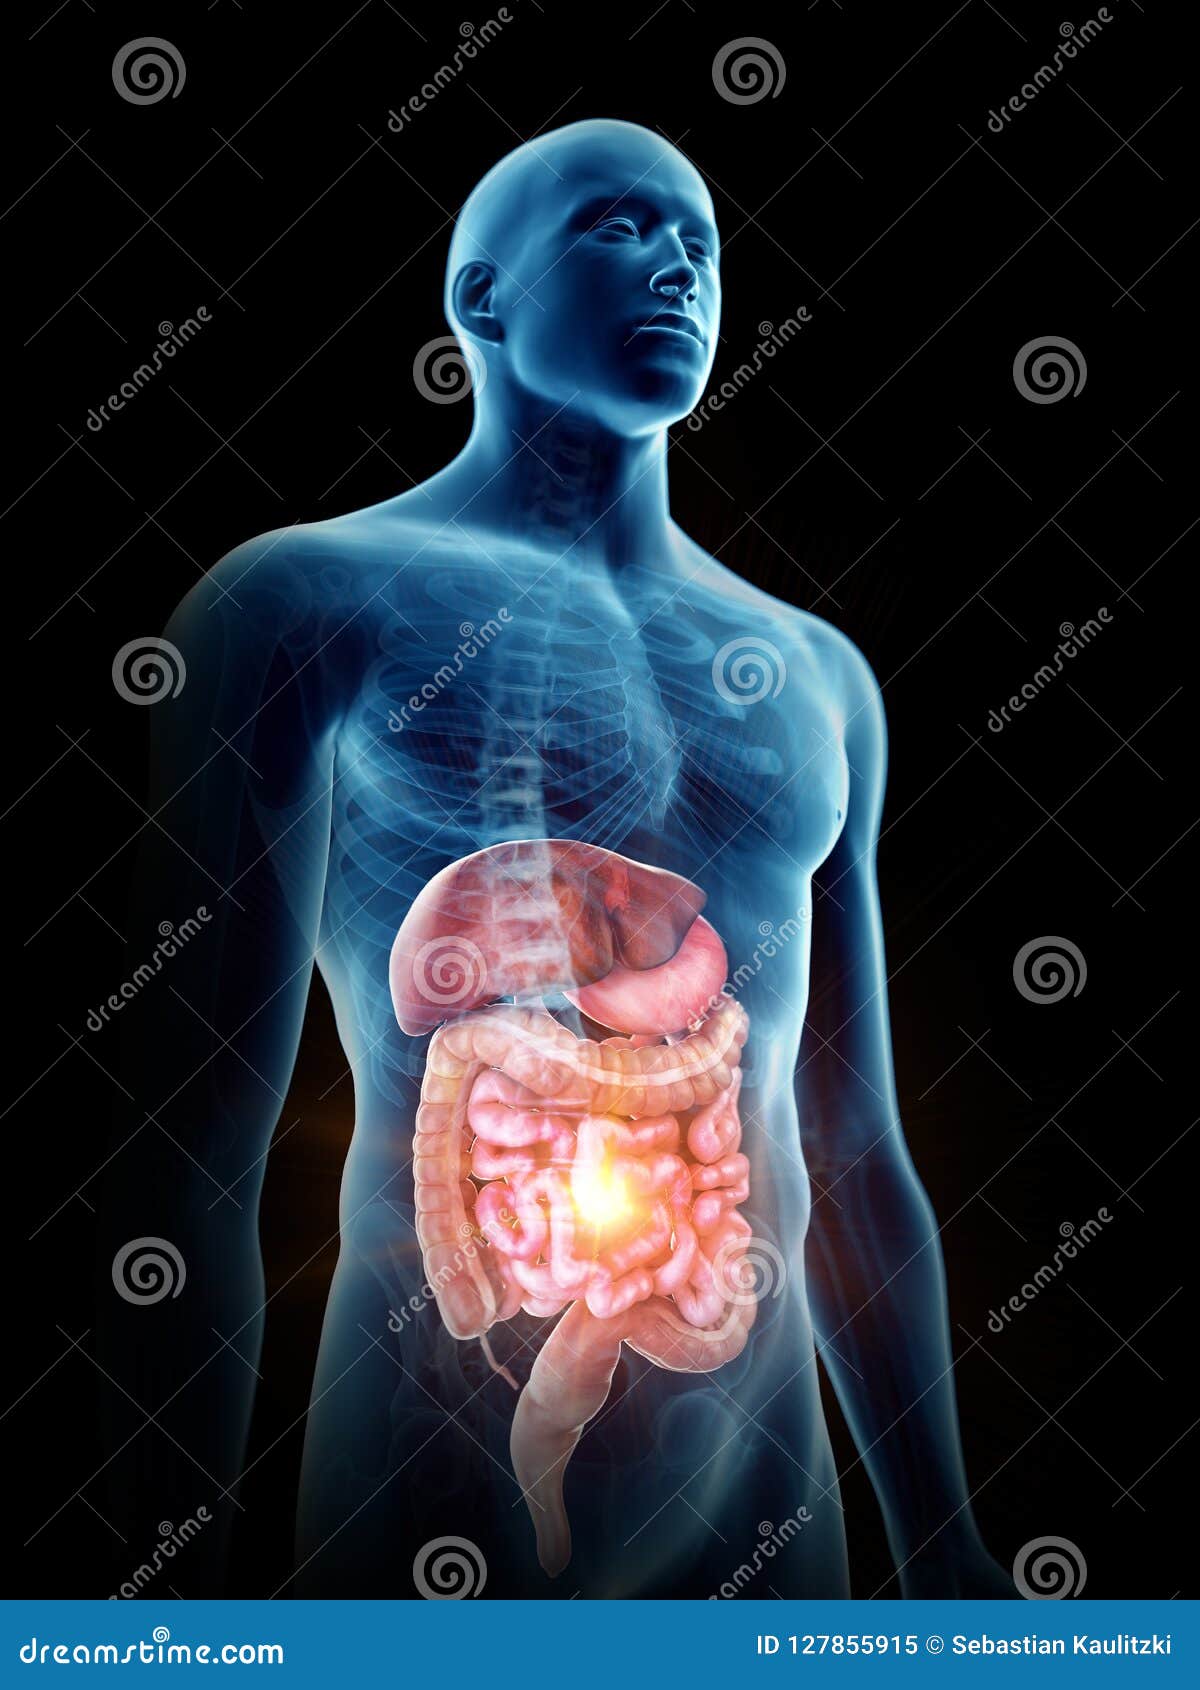 a painful digestive system